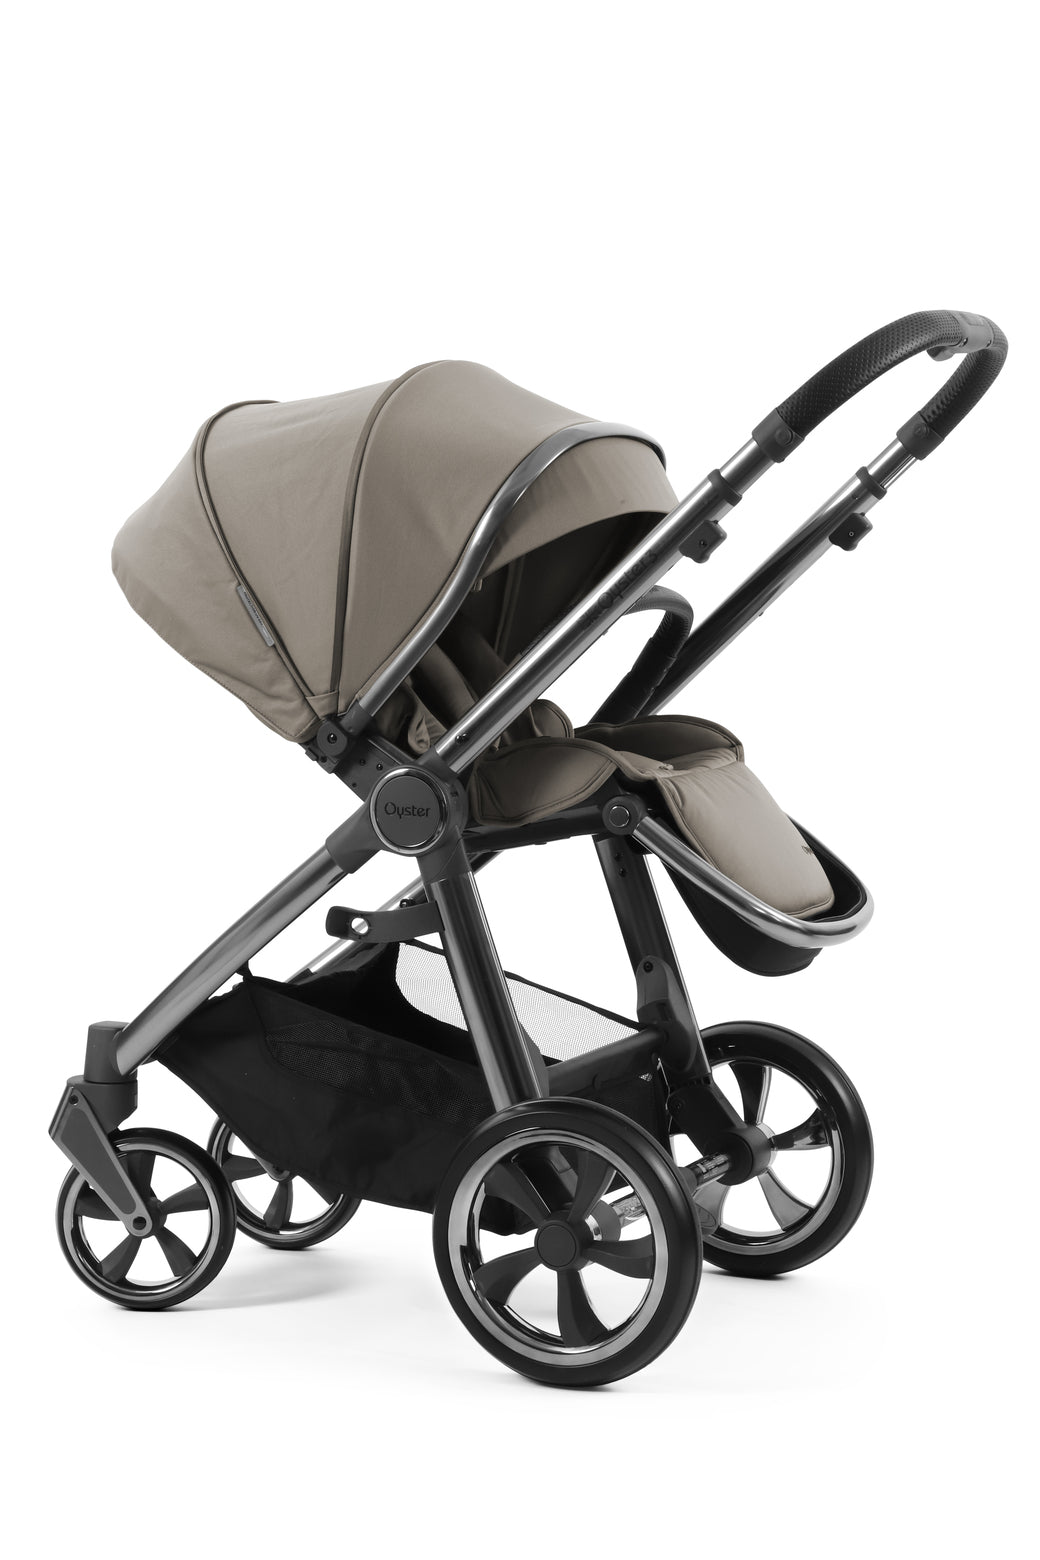 Babystyle Oyster 3 Pushchair - Stone - For Your Little One